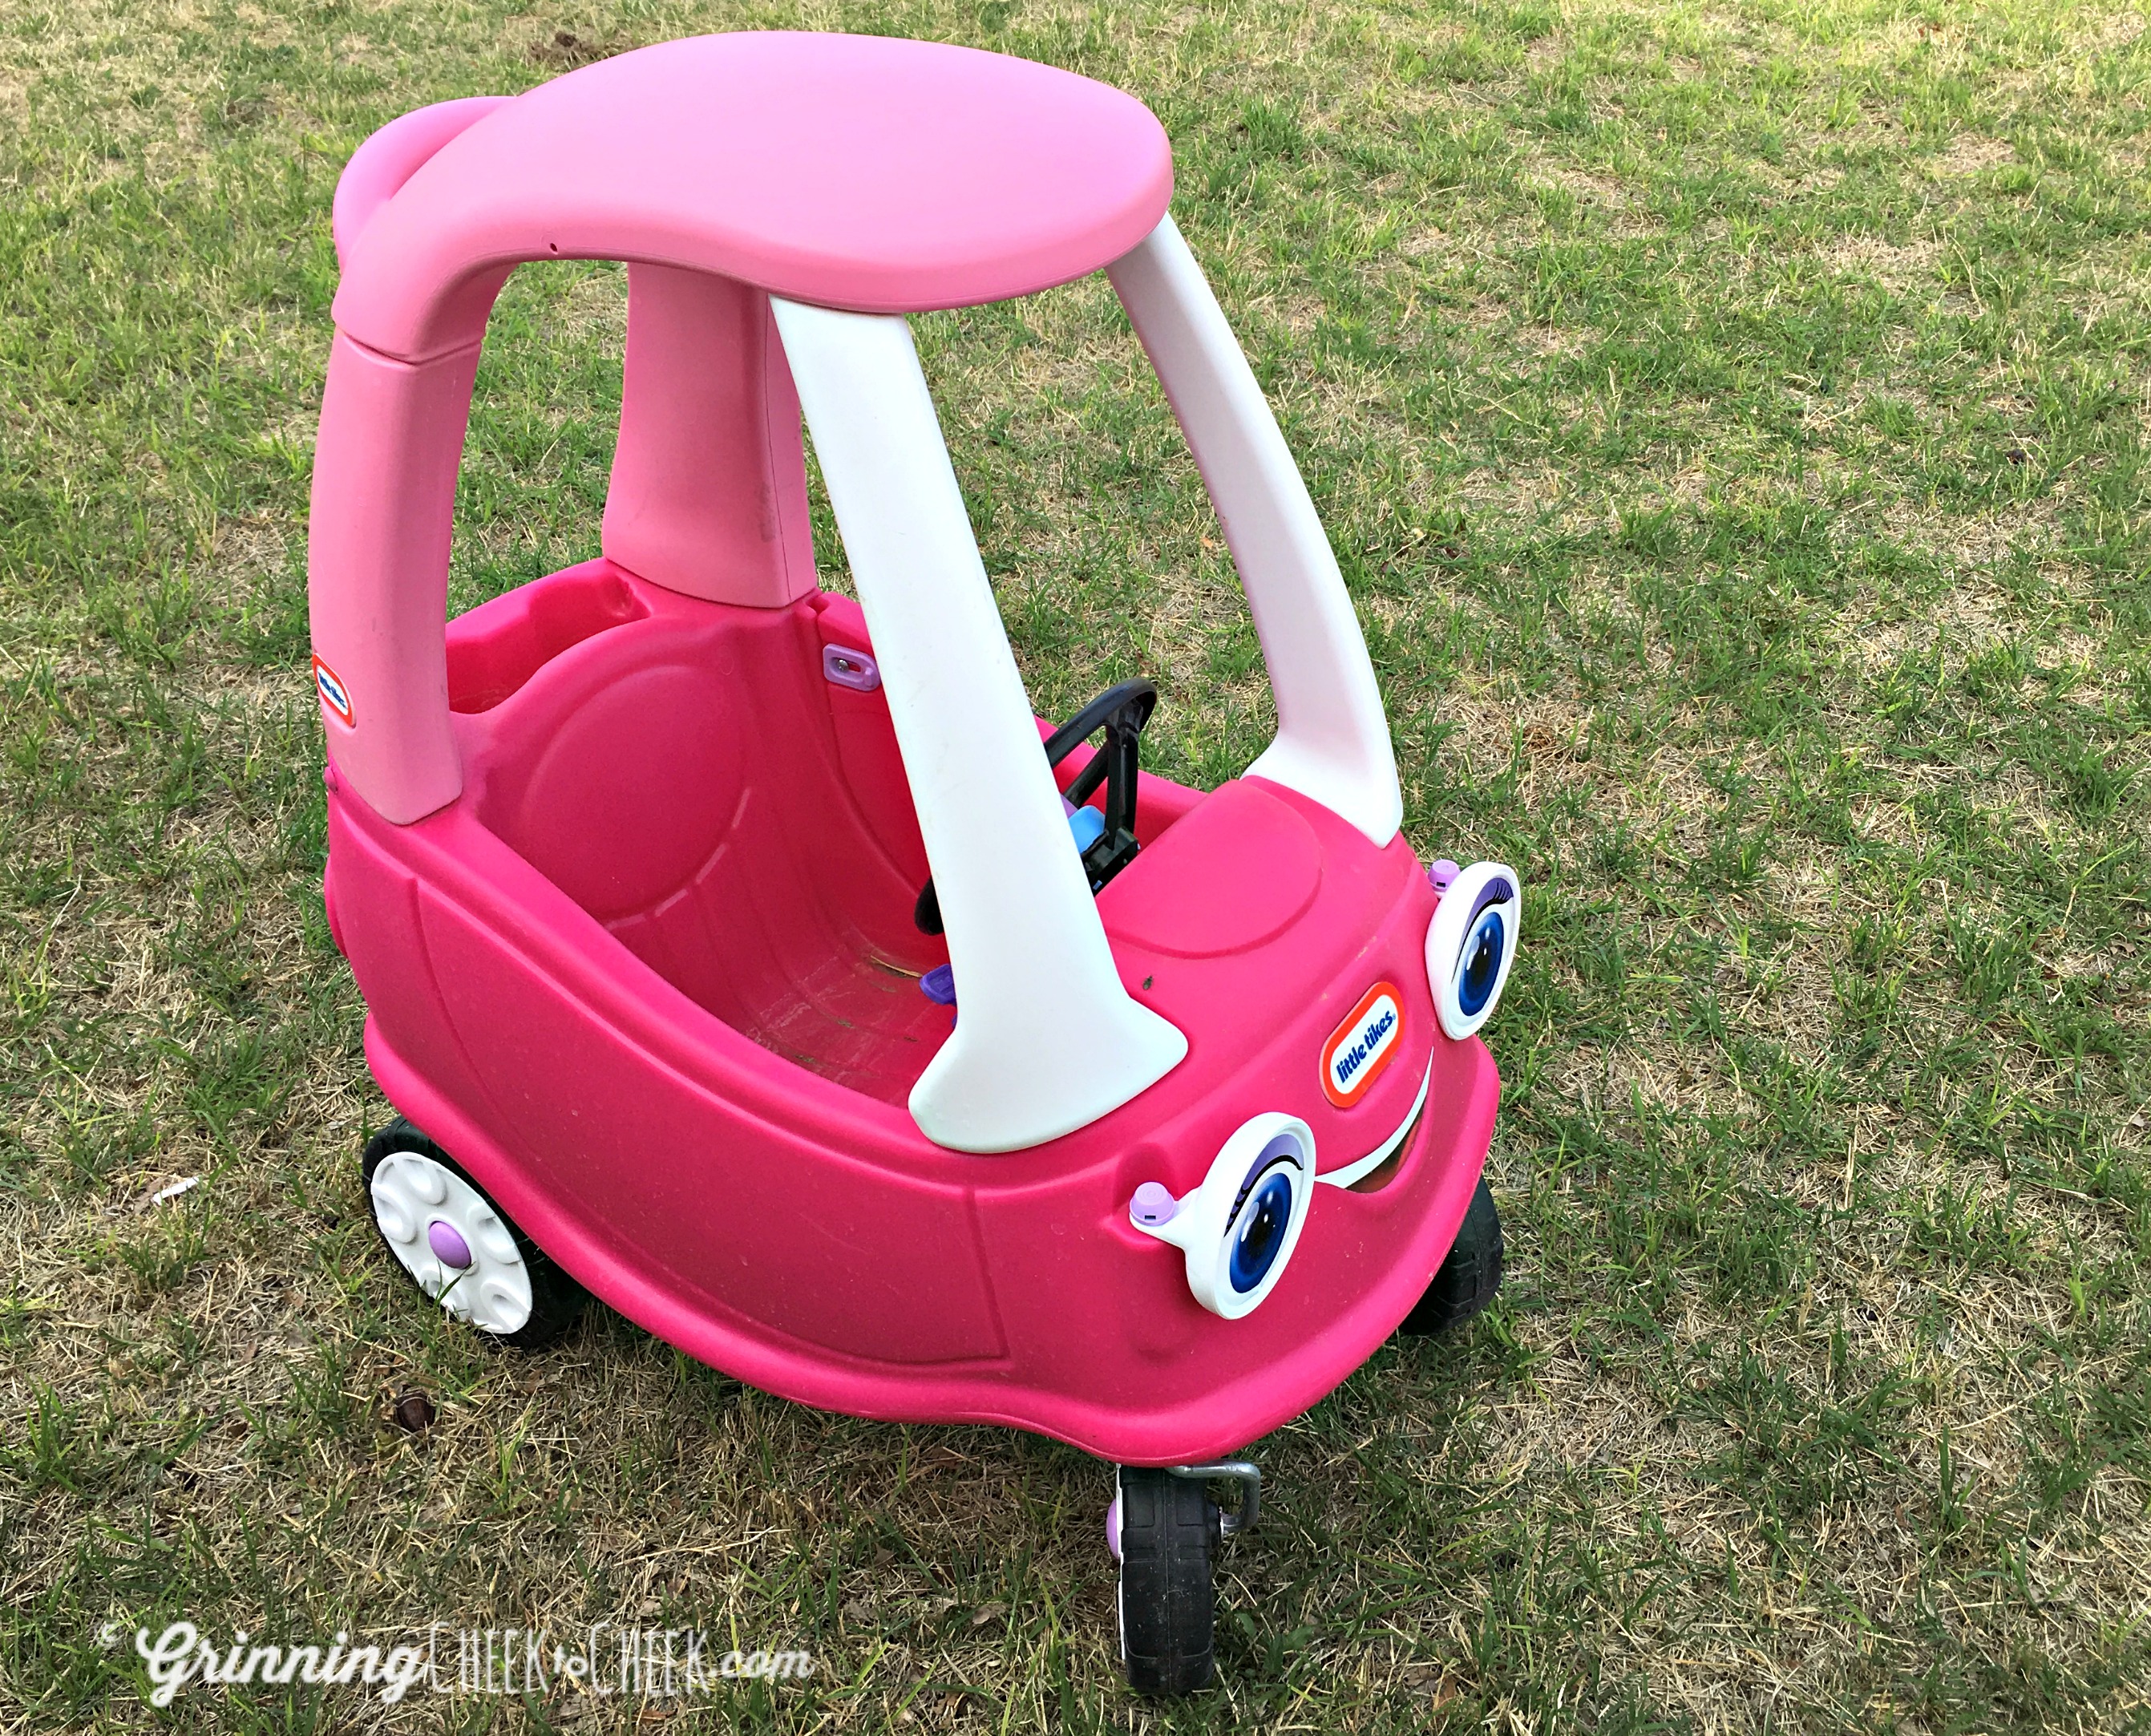 A Ride Fit for a Queen! (Princess at least) #Ad #LittleTikes #CozyCoupe #Princess